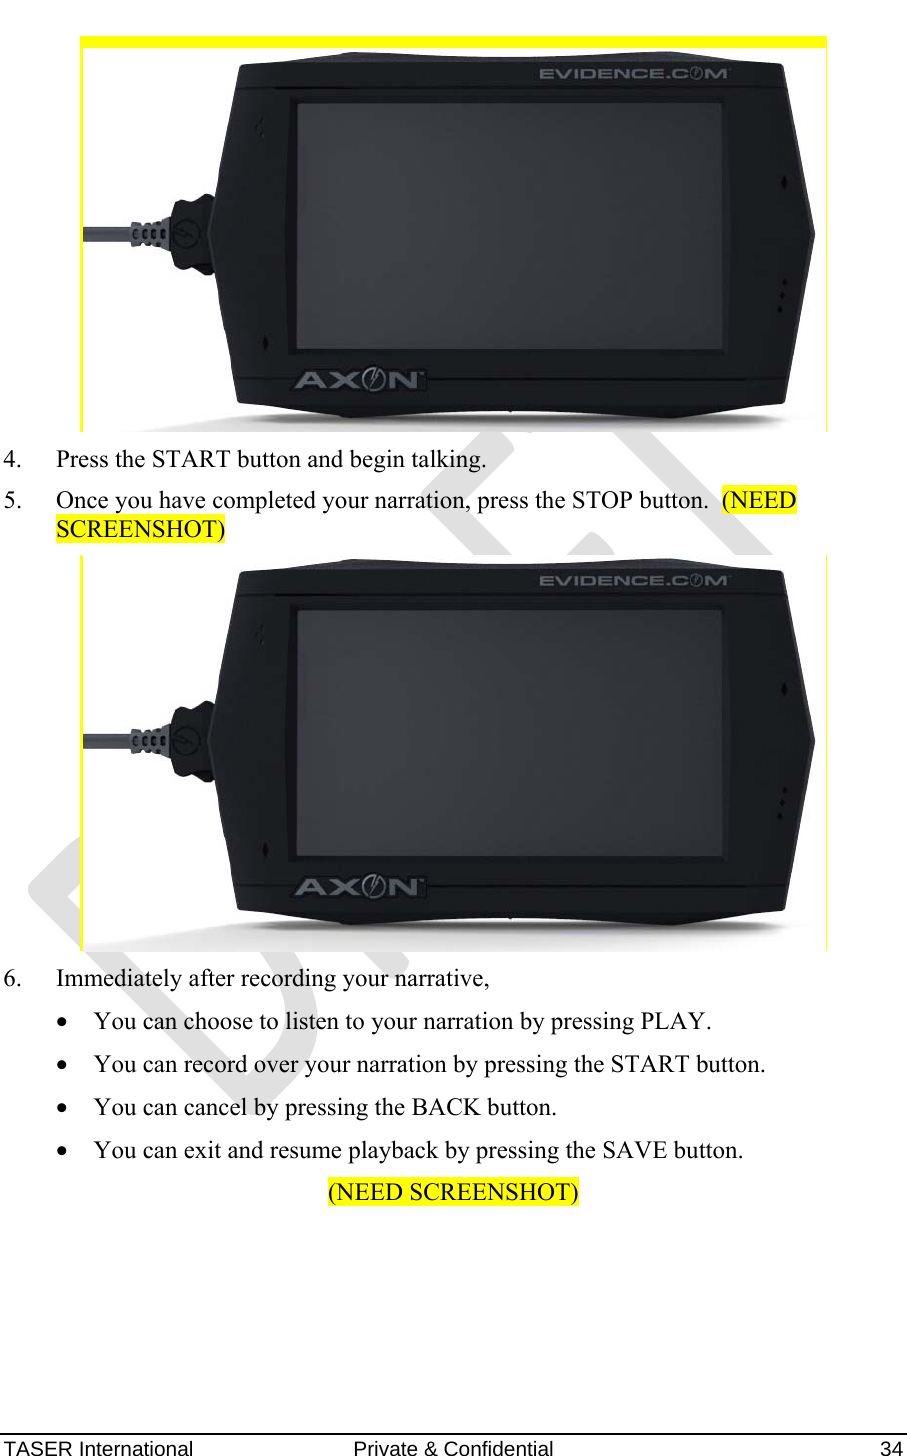 AXON™  4 Jan 2010 TASER International  Private &amp; Confidential    34  4. Press the START button and begin talking. 5. Once you have completed your narration, press the STOP button.  (NEED SCREENSHOT)  6. Immediately after recording your narrative,  • You can choose to listen to your narration by pressing PLAY. • You can record over your narration by pressing the START button. • You can cancel by pressing the BACK button. • You can exit and resume playback by pressing the SAVE button. (NEED SCREENSHOT) 